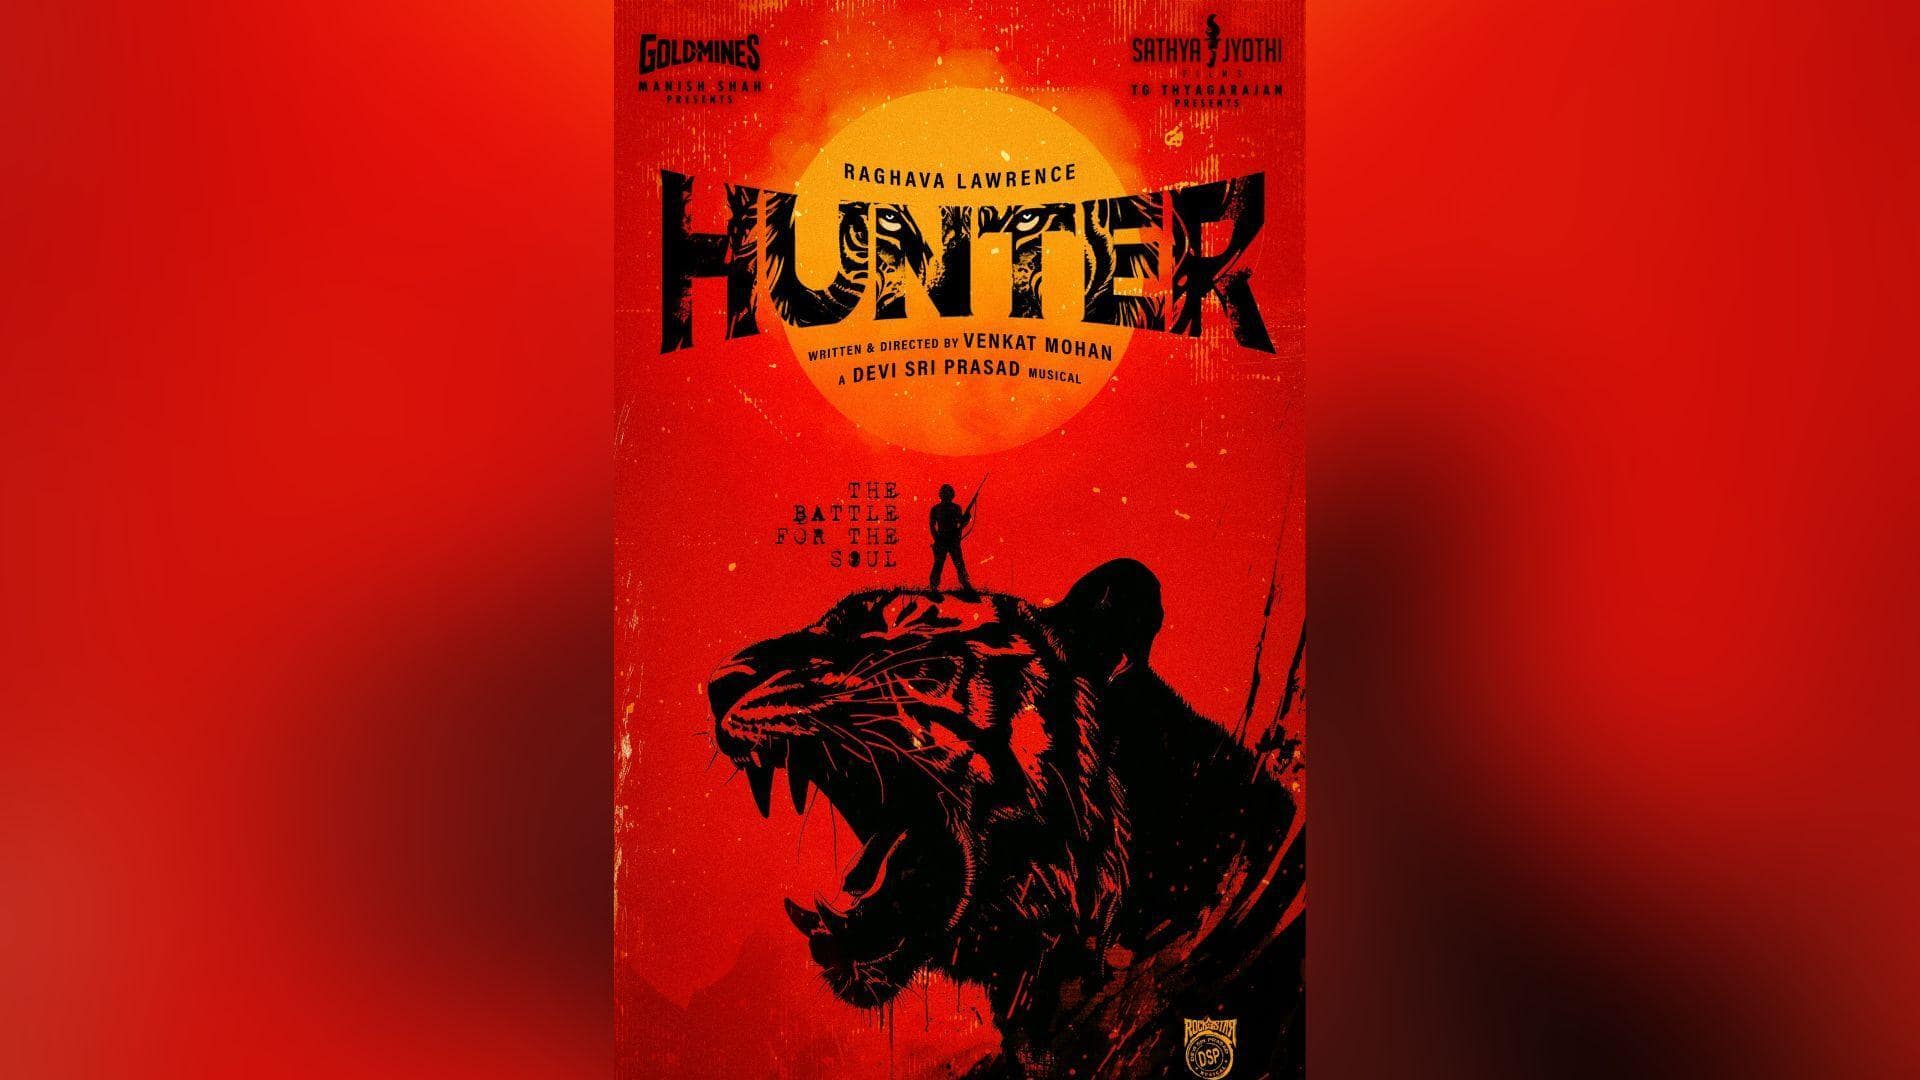 Raghava Lawrence announces 'Hunter' in collaboration with Venkat Mohan